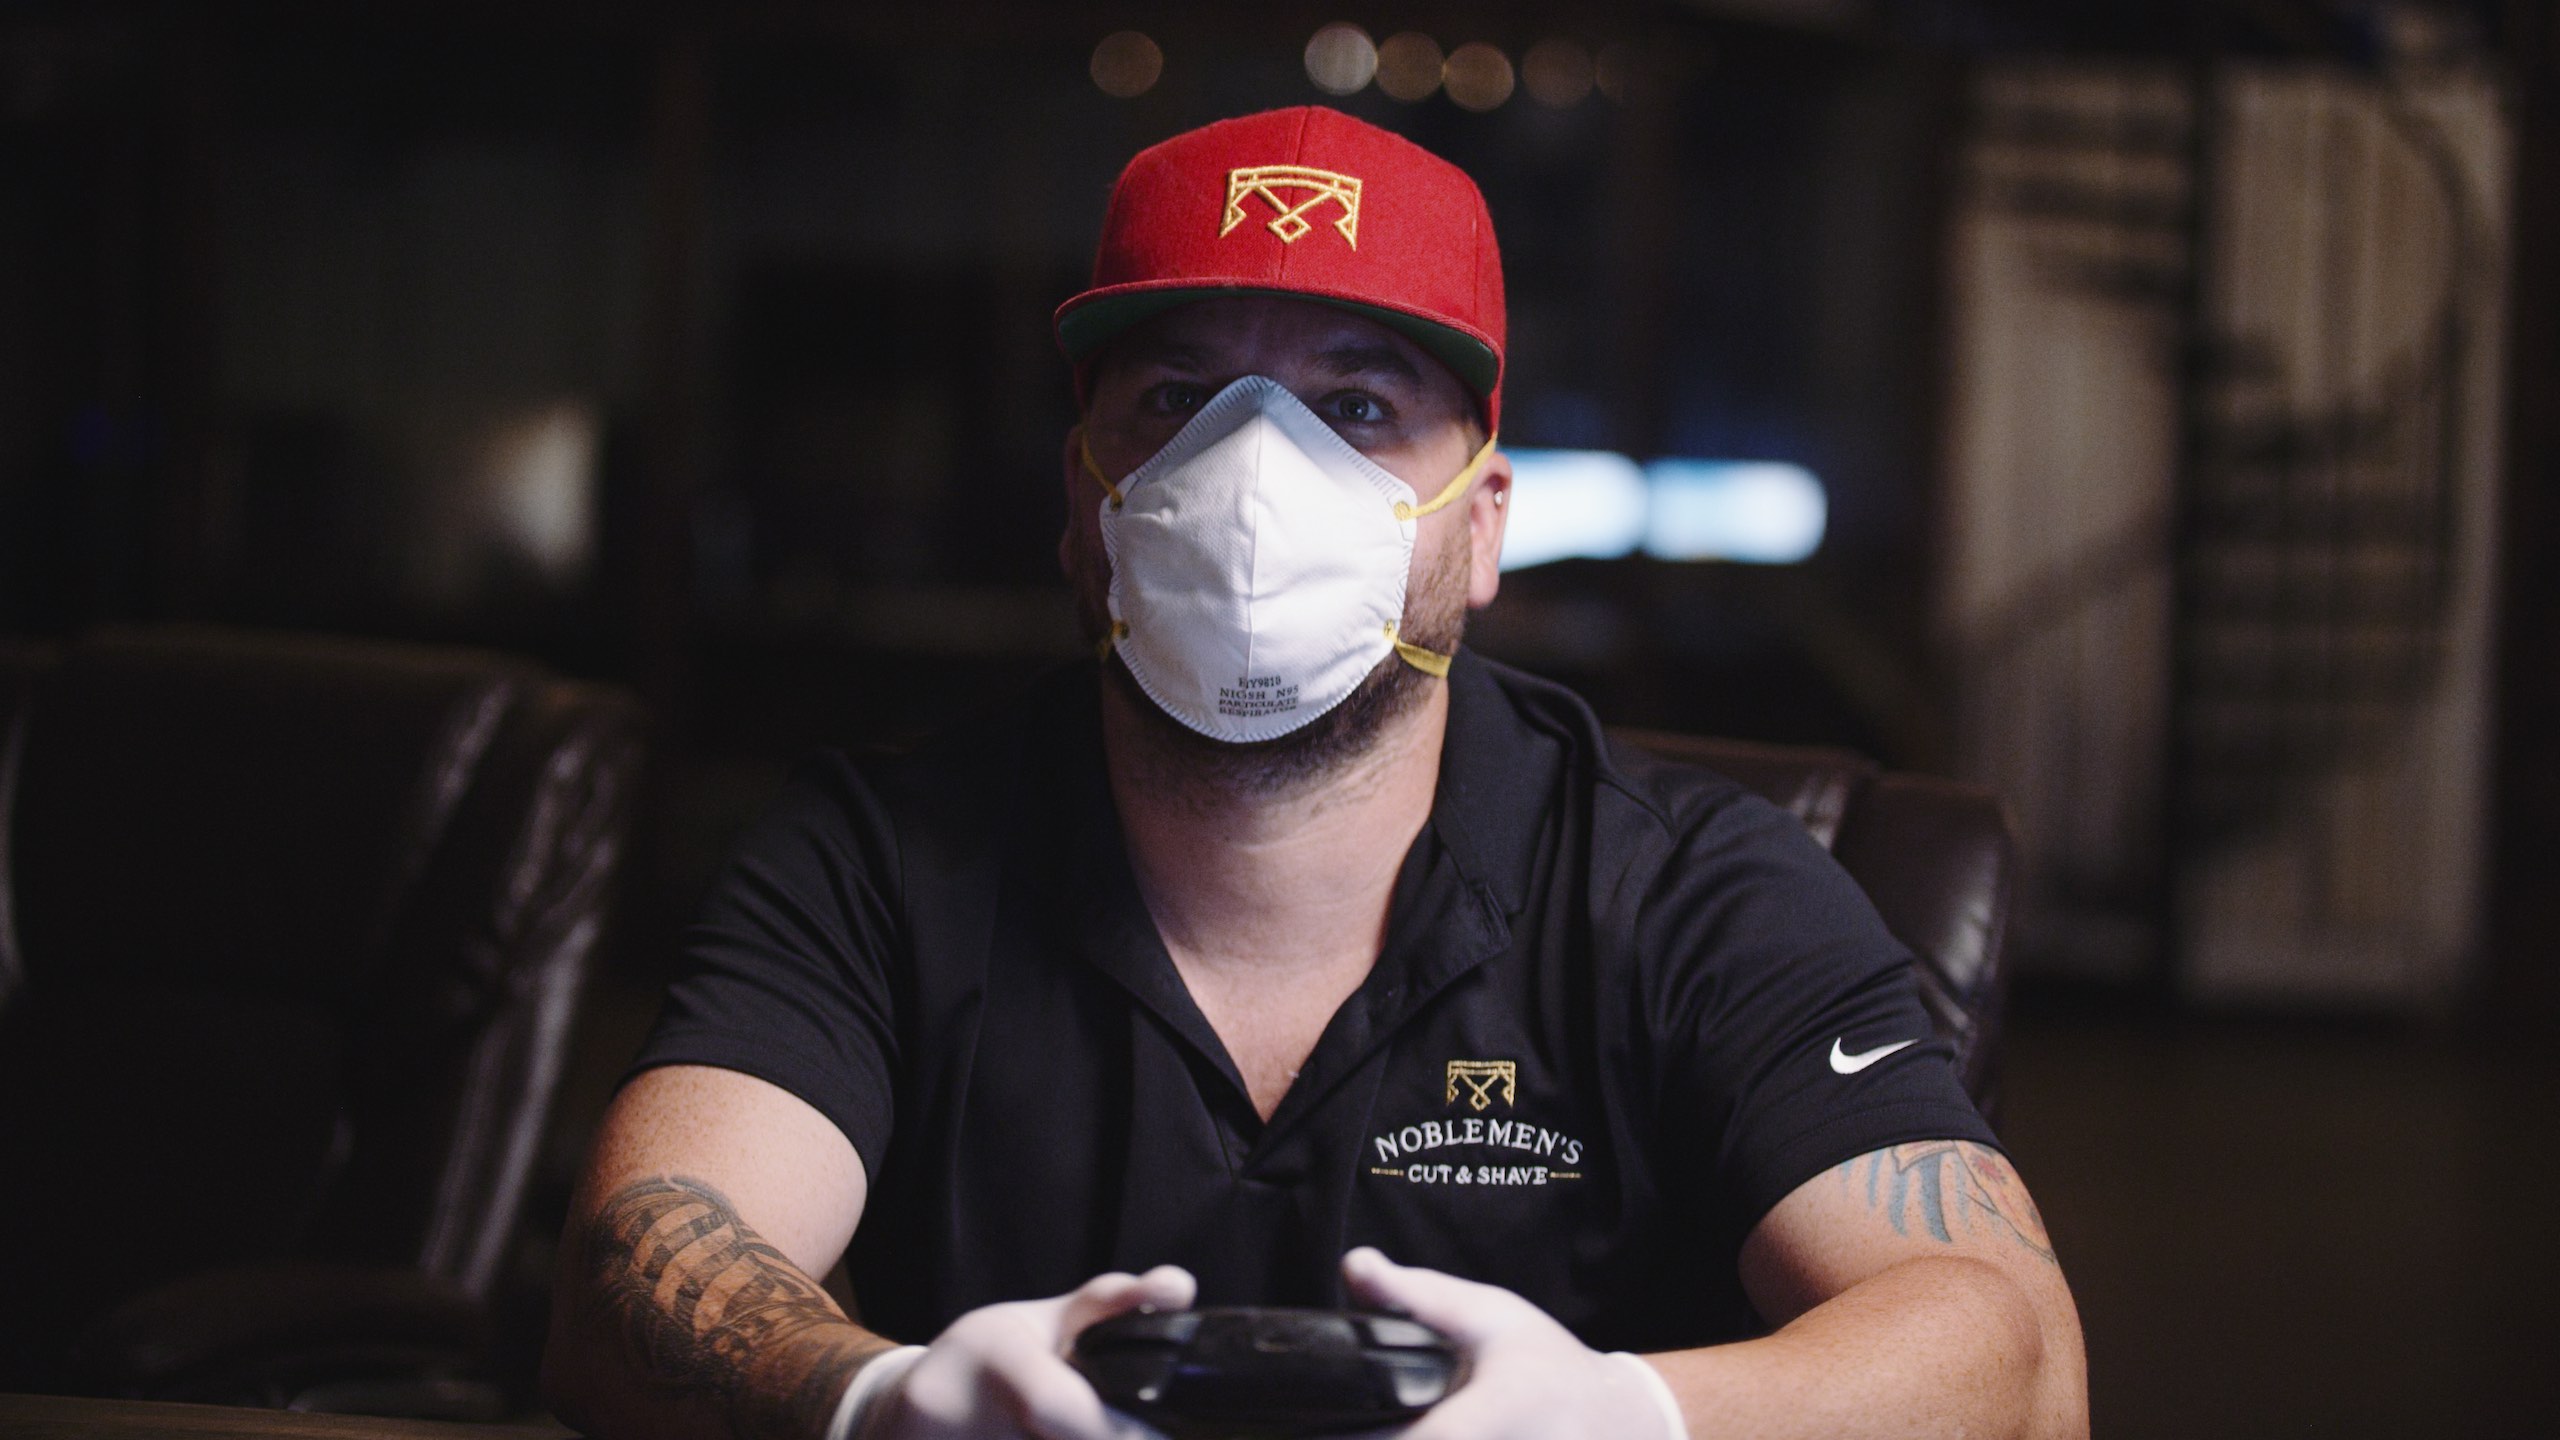 IU C&I Studios Portfolio Reach Out and Play Tattooed man wearing red cap, black shirt and white mask using video game controller wearing white latex gloves